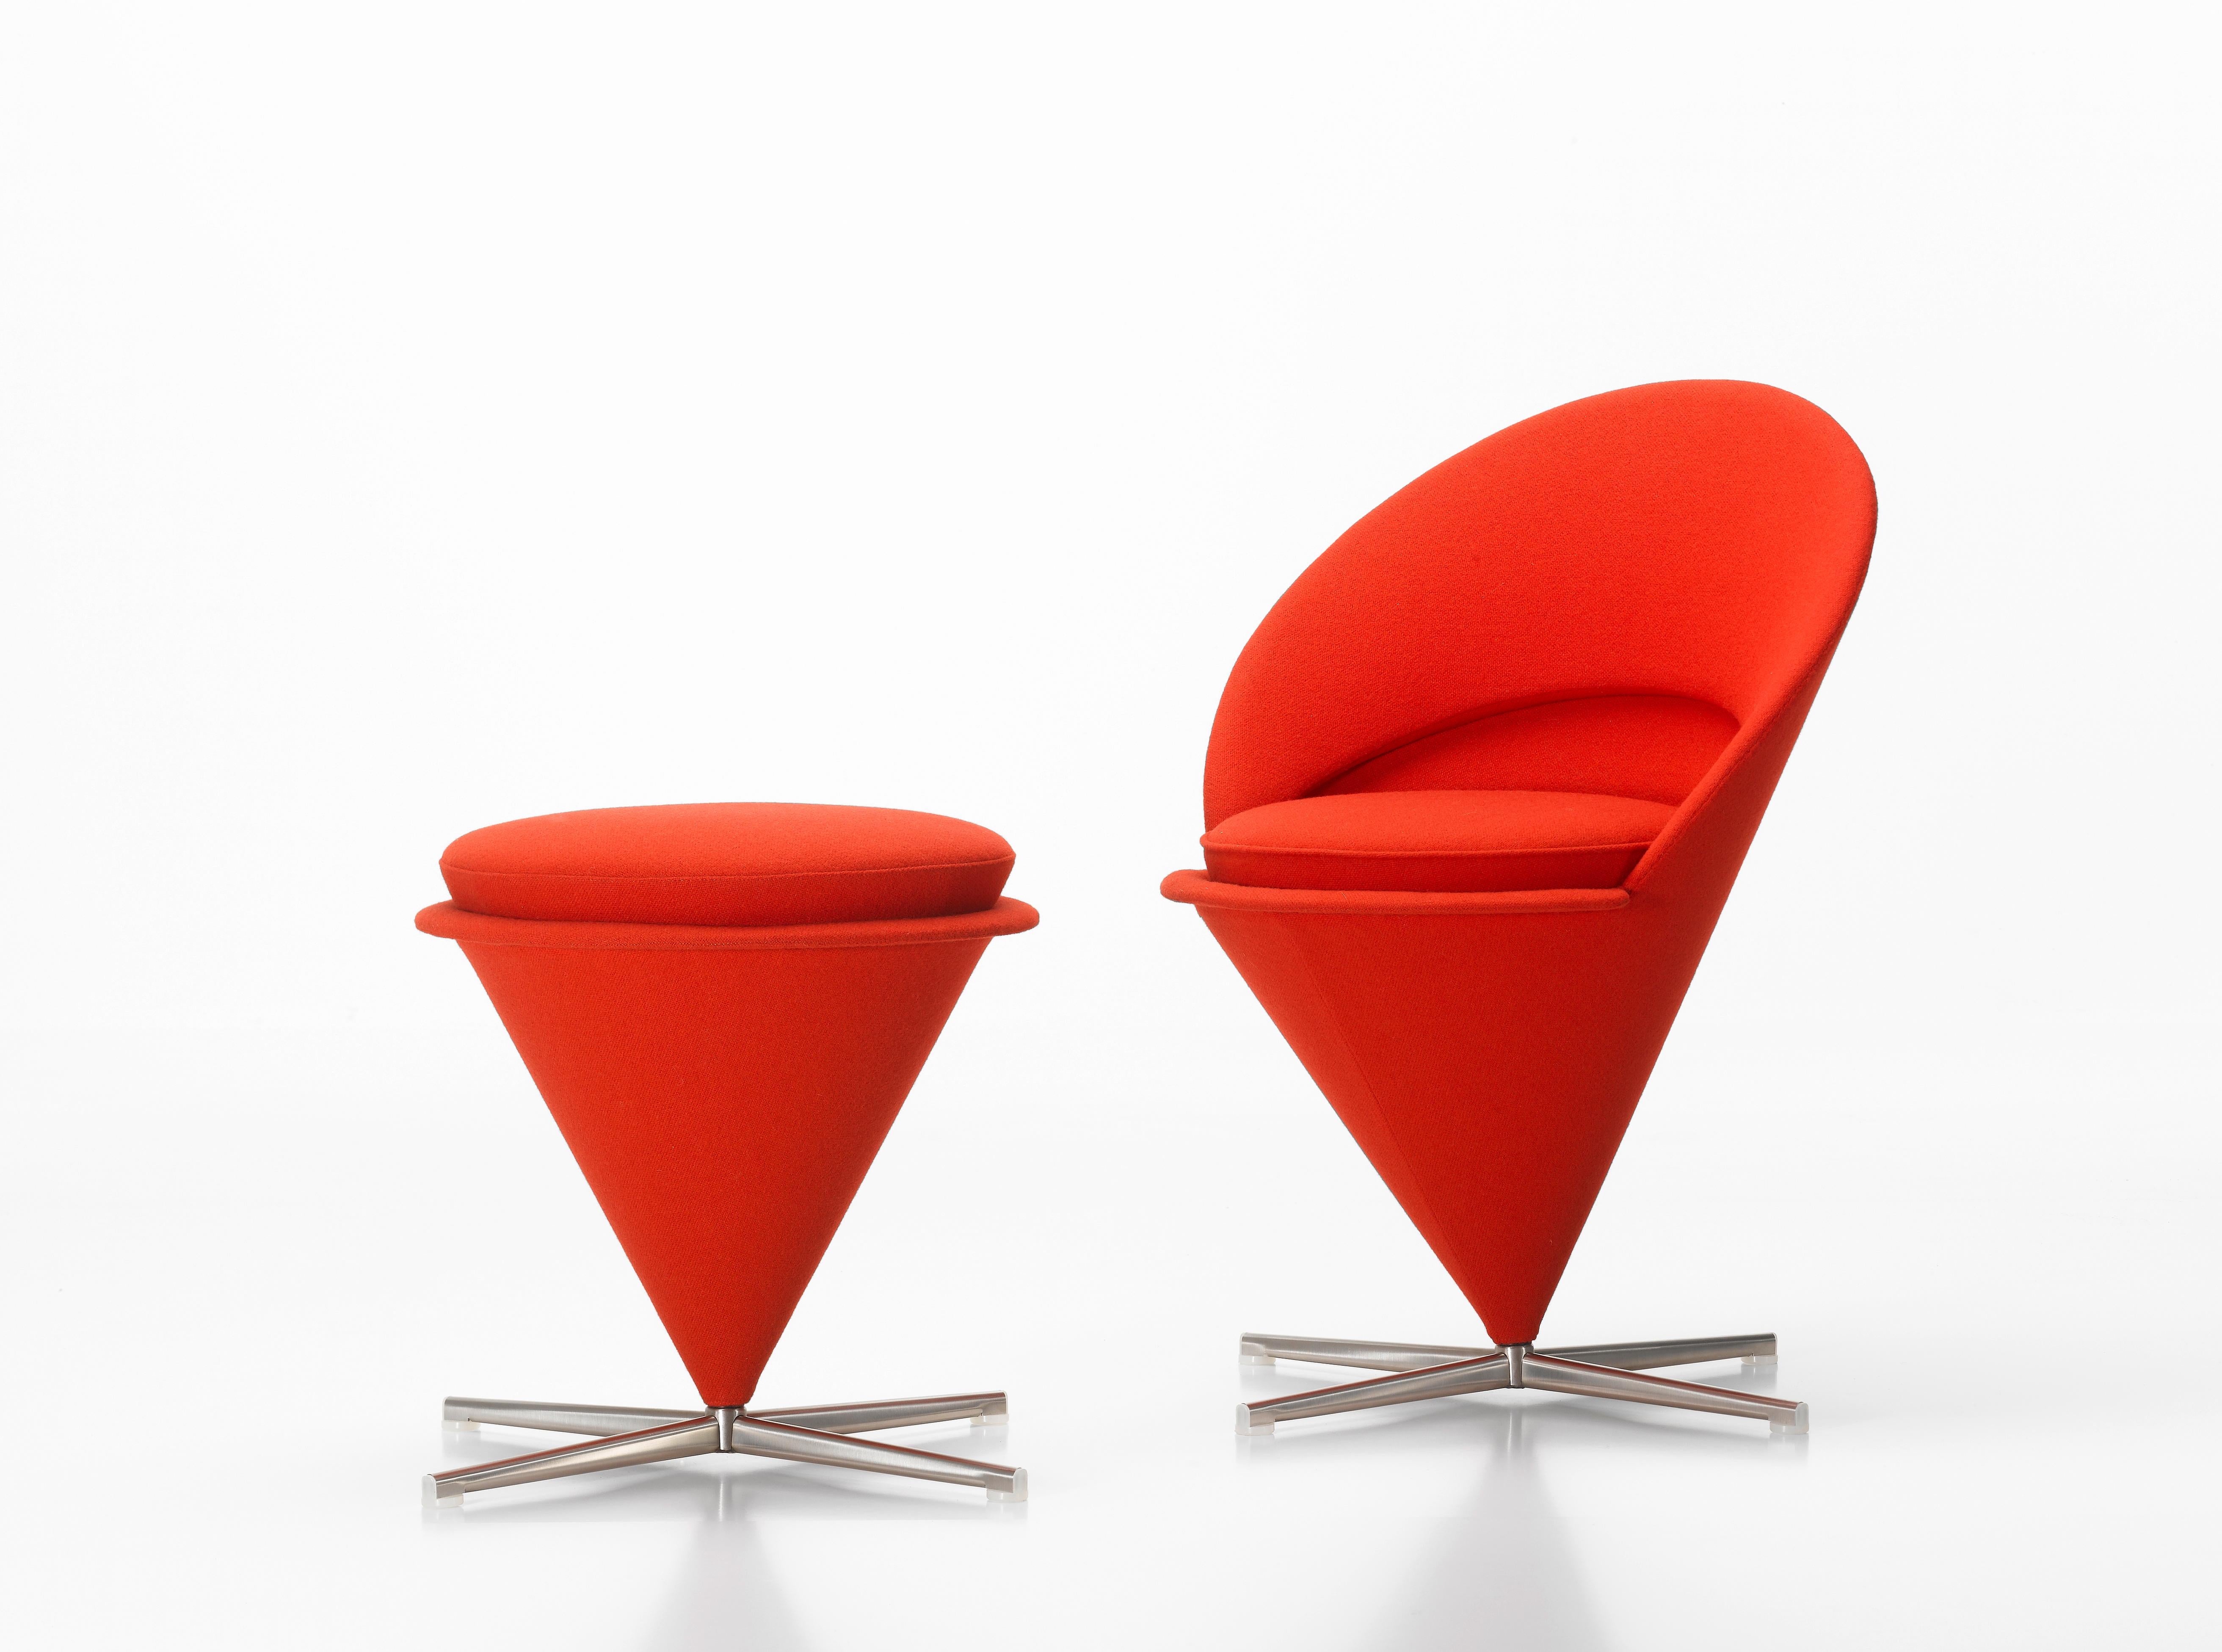 These items are currently only available in the United States.

Originally designed for a Danish restaurant, the Cone chair takes its shape from the classic geometric figure for which it is named. The cone-shaped seat is mounted at its point on a